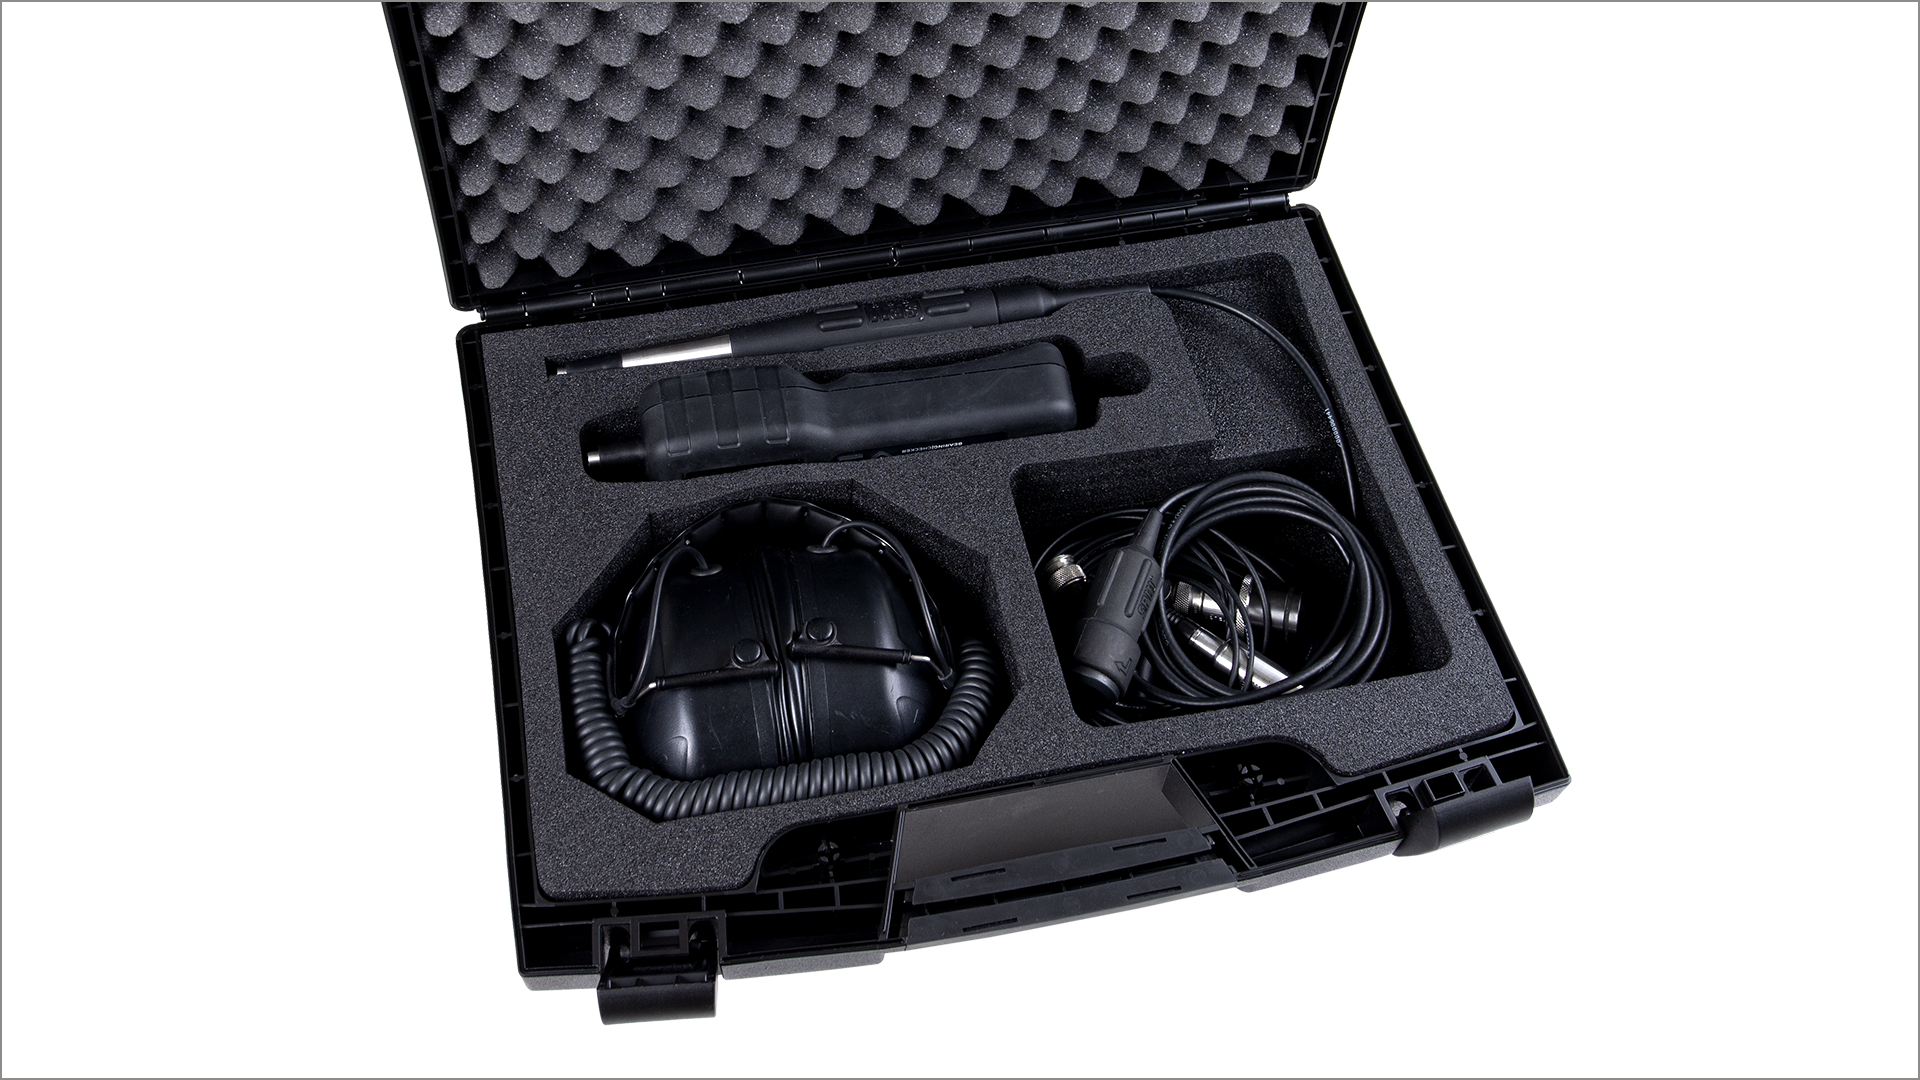 Open carrying case CAS30, including BearingChecker instrument and accessories